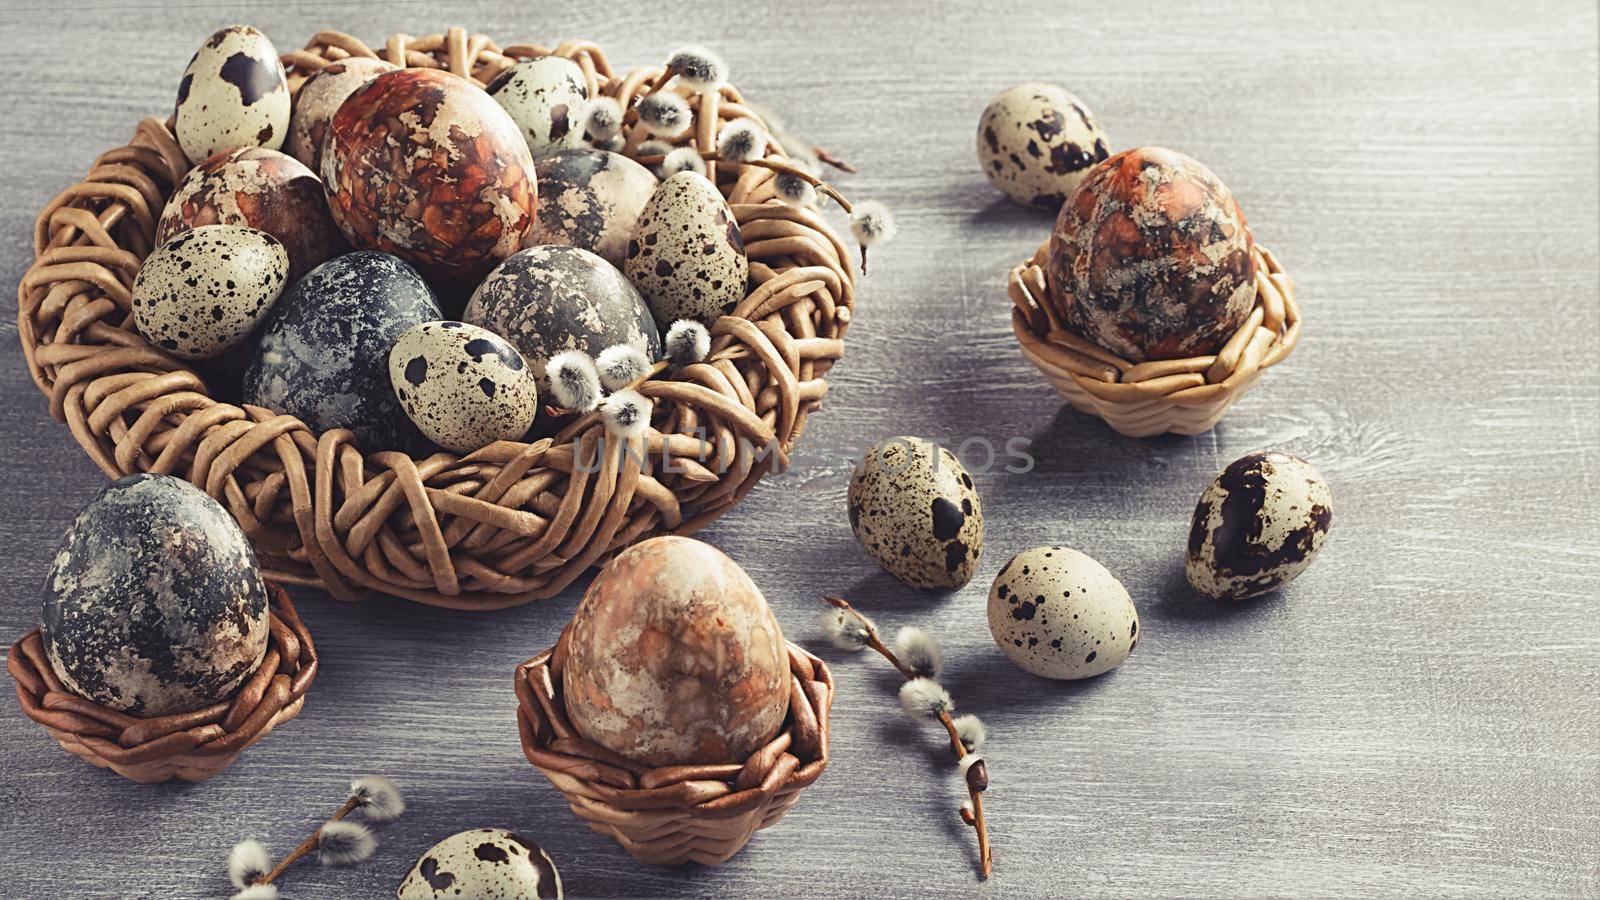 Easter composition - several marble eggs painted with natural dyes in a wicker nest and baskets.